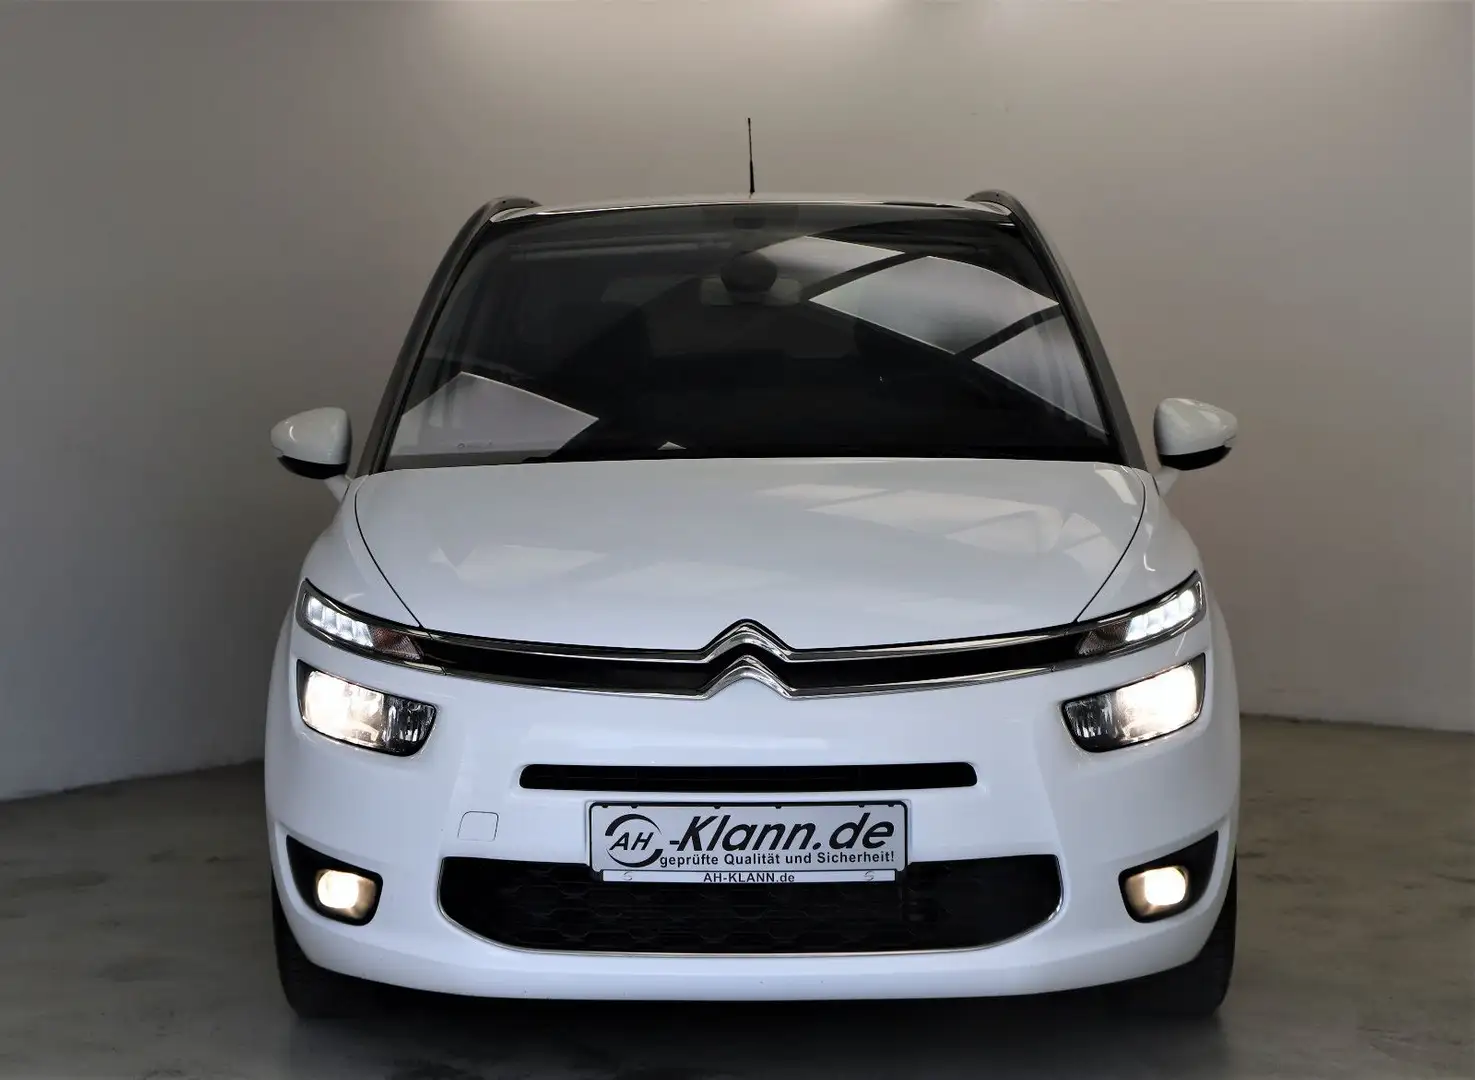 Citroen C4 SpaceTourer C4 2.0 HDi 150PS Grand Picasso/Spacetourer LED Wit - 2